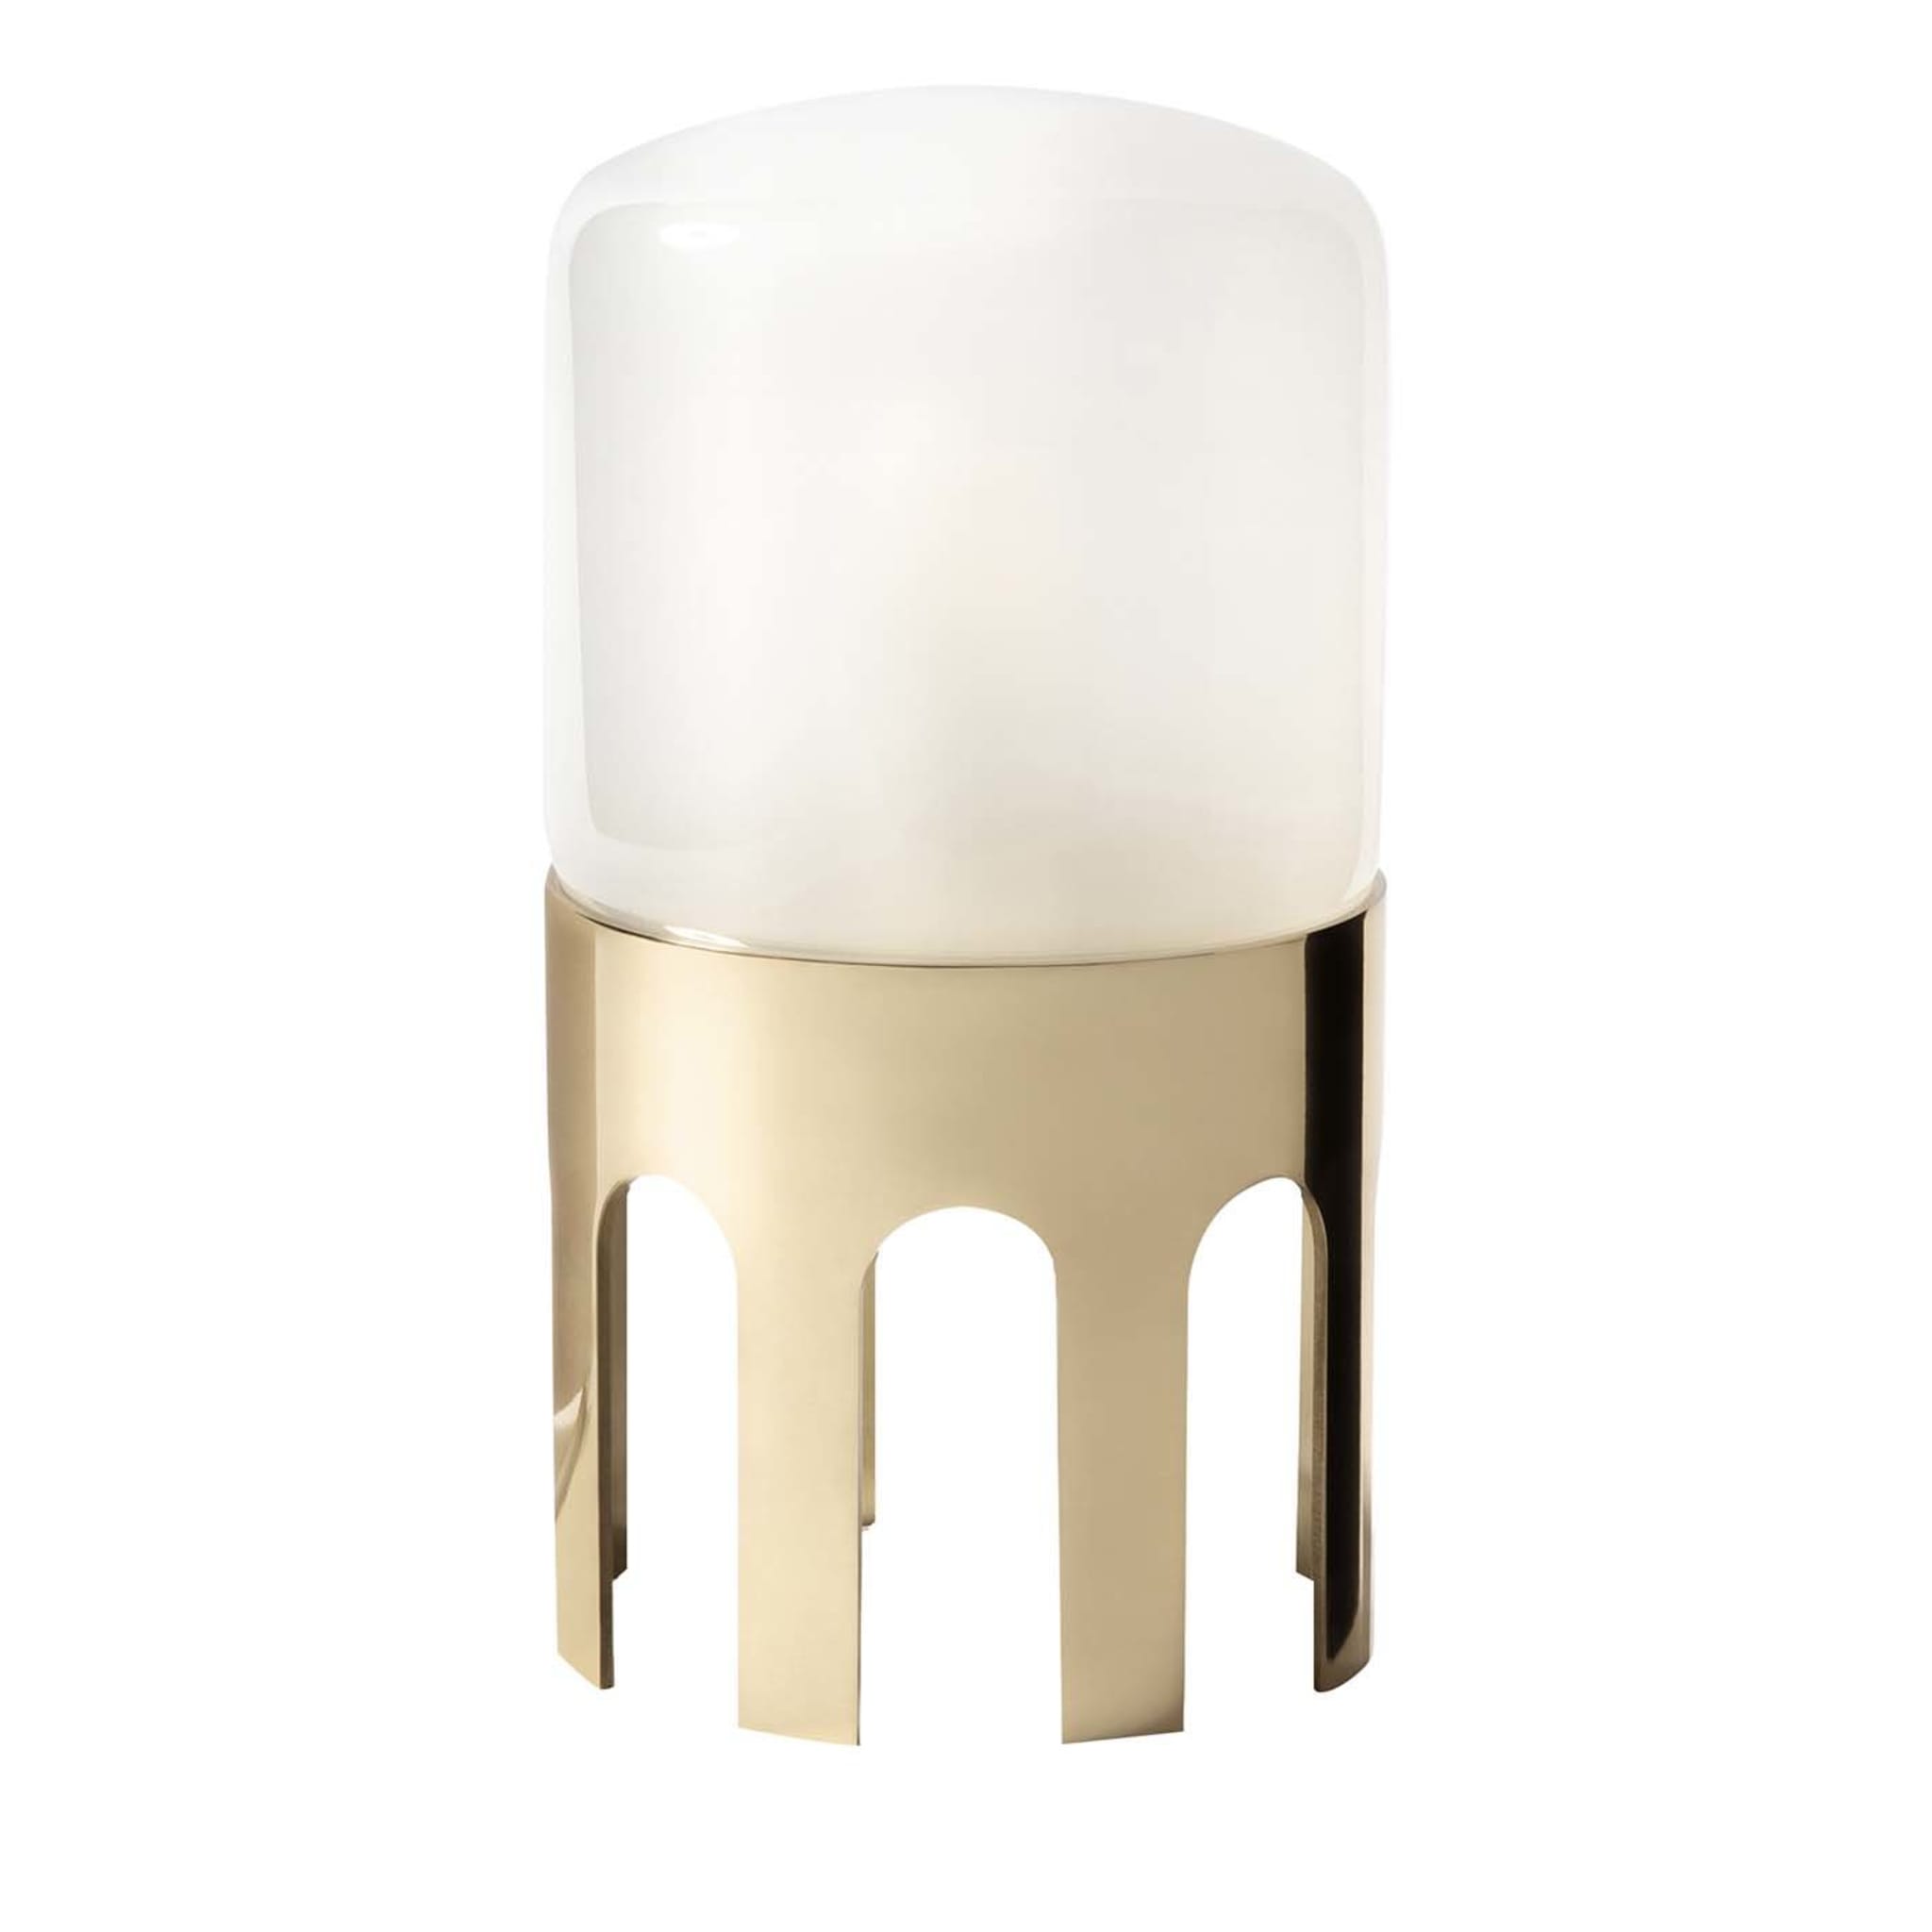 TPLG1 Polished Brass Table Lamp by GoodMorning studio - Main view